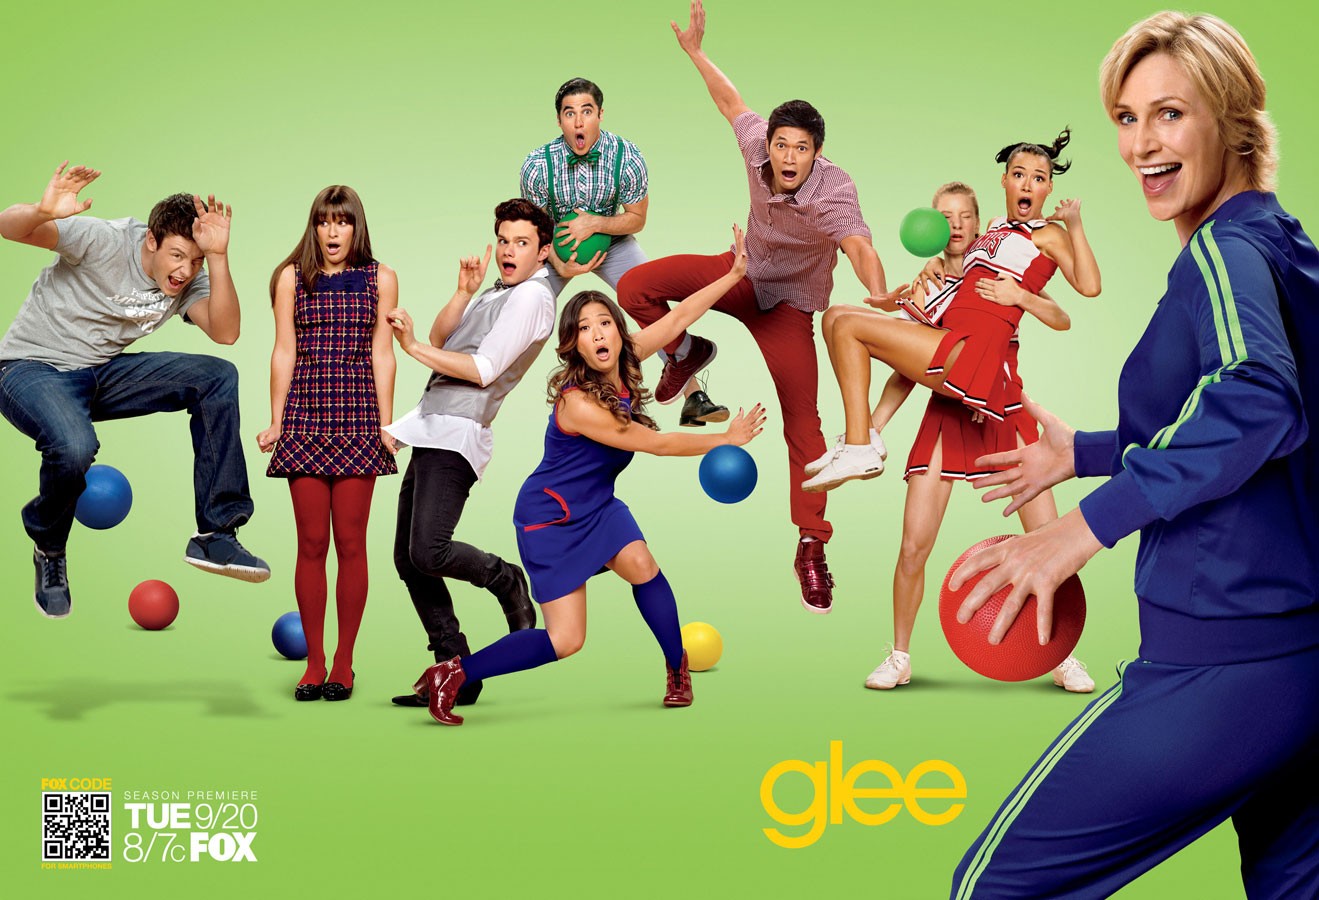 Extra Large TV Poster Image for Glee (#24 of 30)